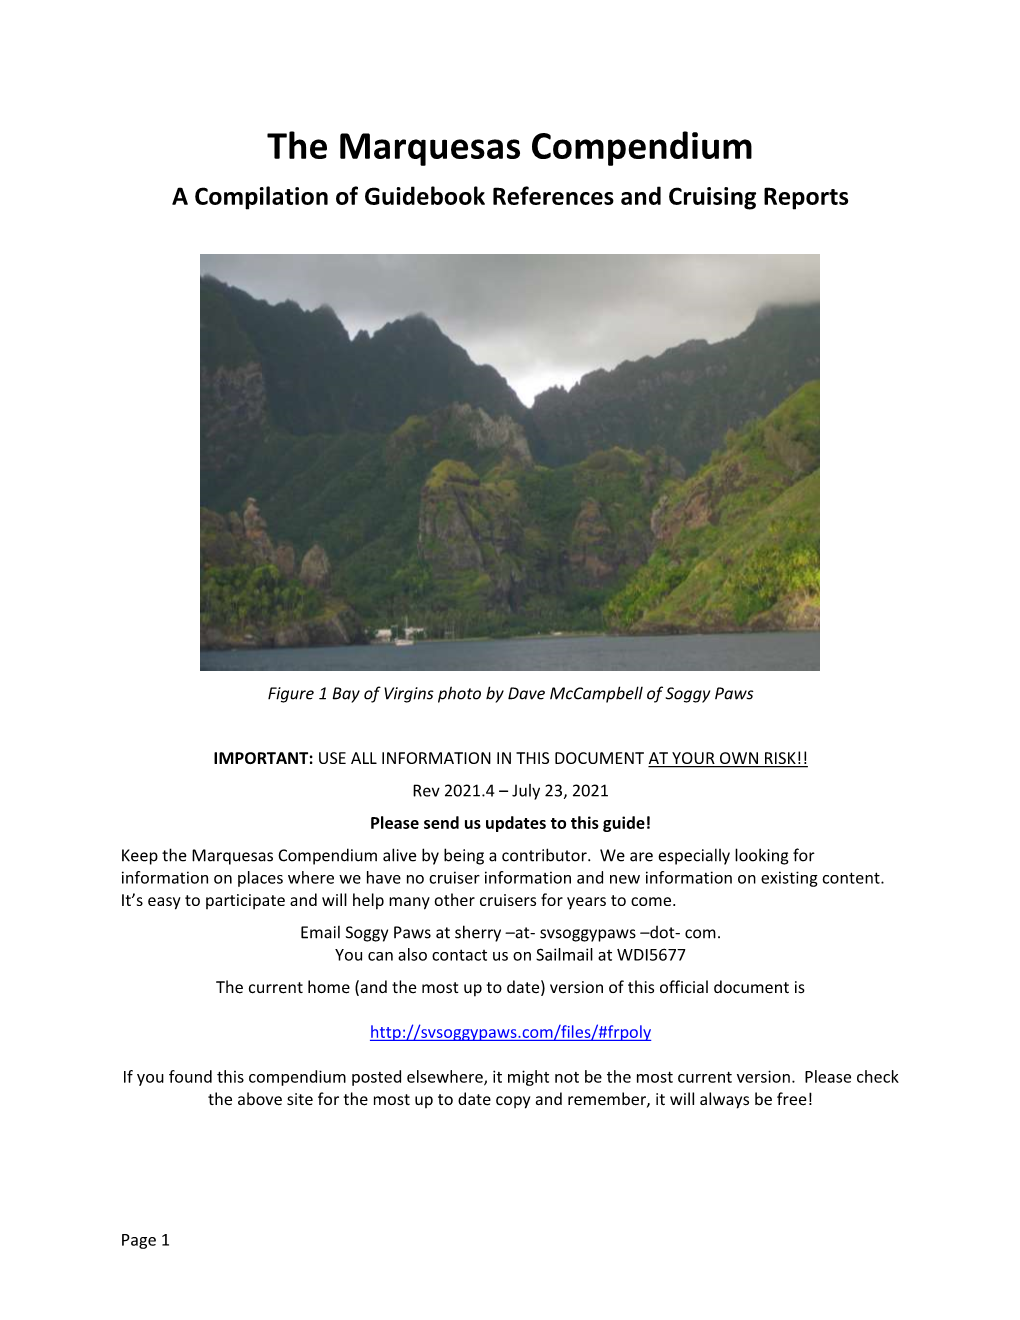 The Marquesas Compendium a Compilation of Guidebook References and Cruising Reports